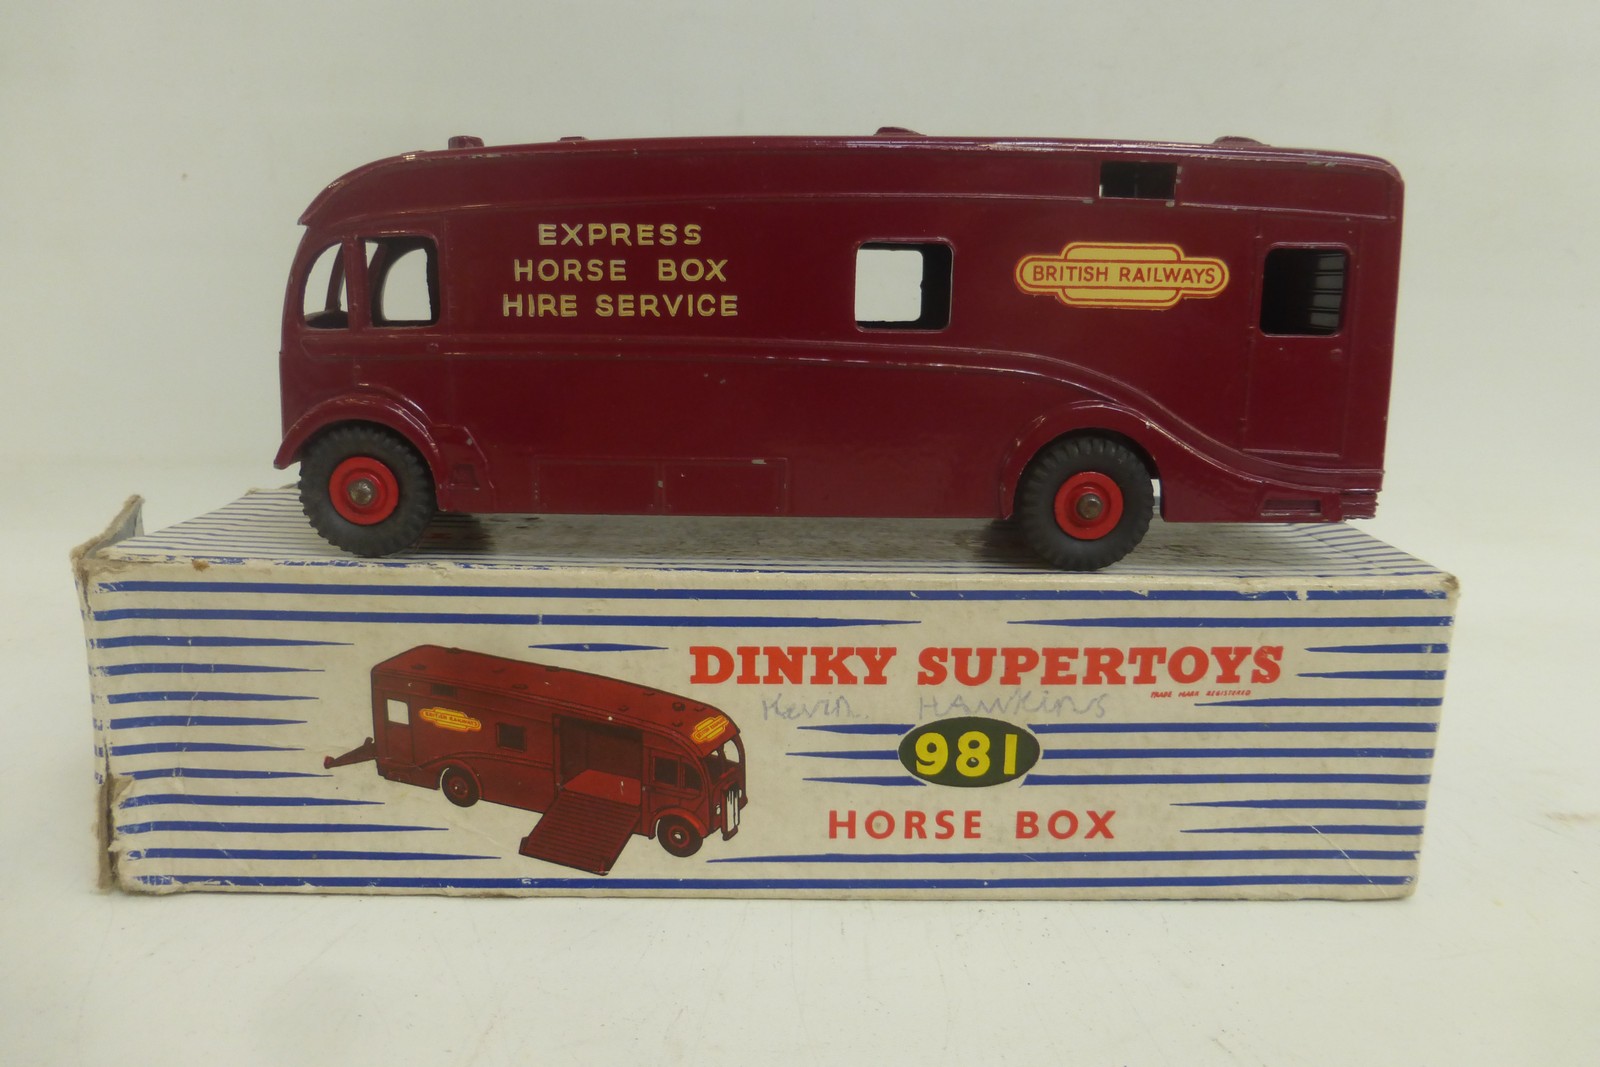 DINKY SUPERTOYS - Horse Box, no. 981, in excellent condition, with very minor chipping, striped - Image 2 of 2